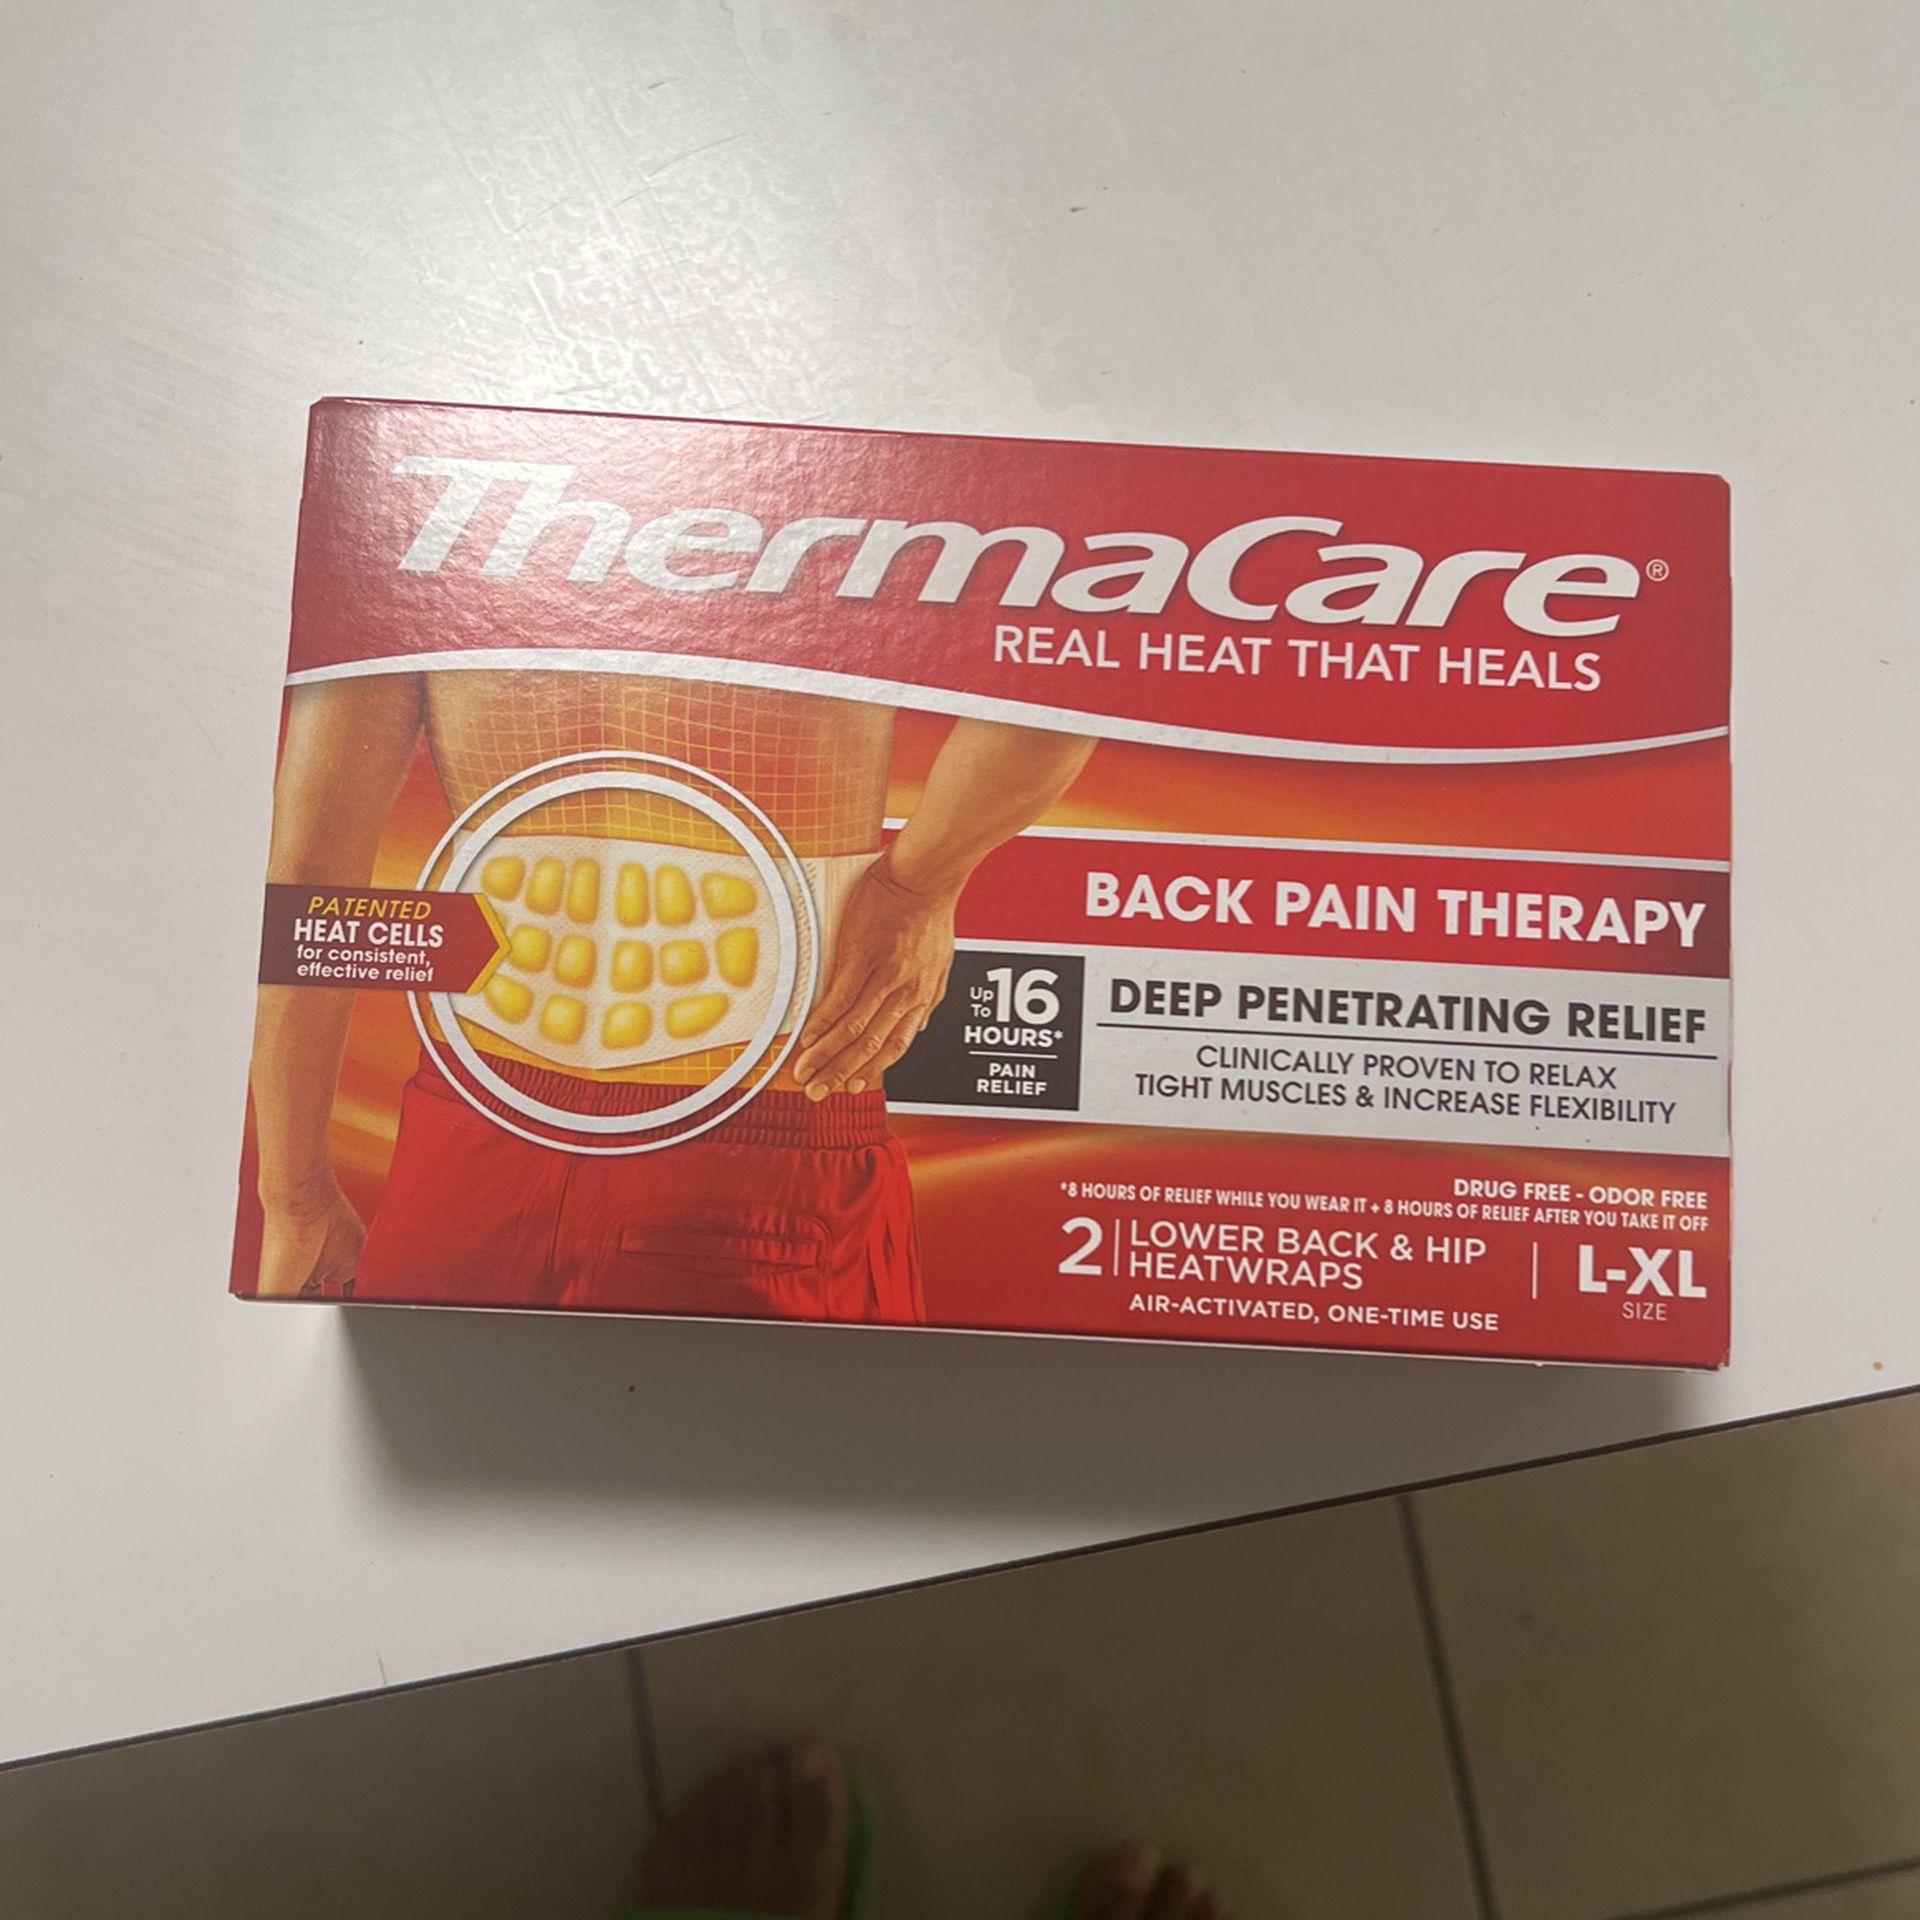 ThermaCare REAL HEAT THAT HEALS